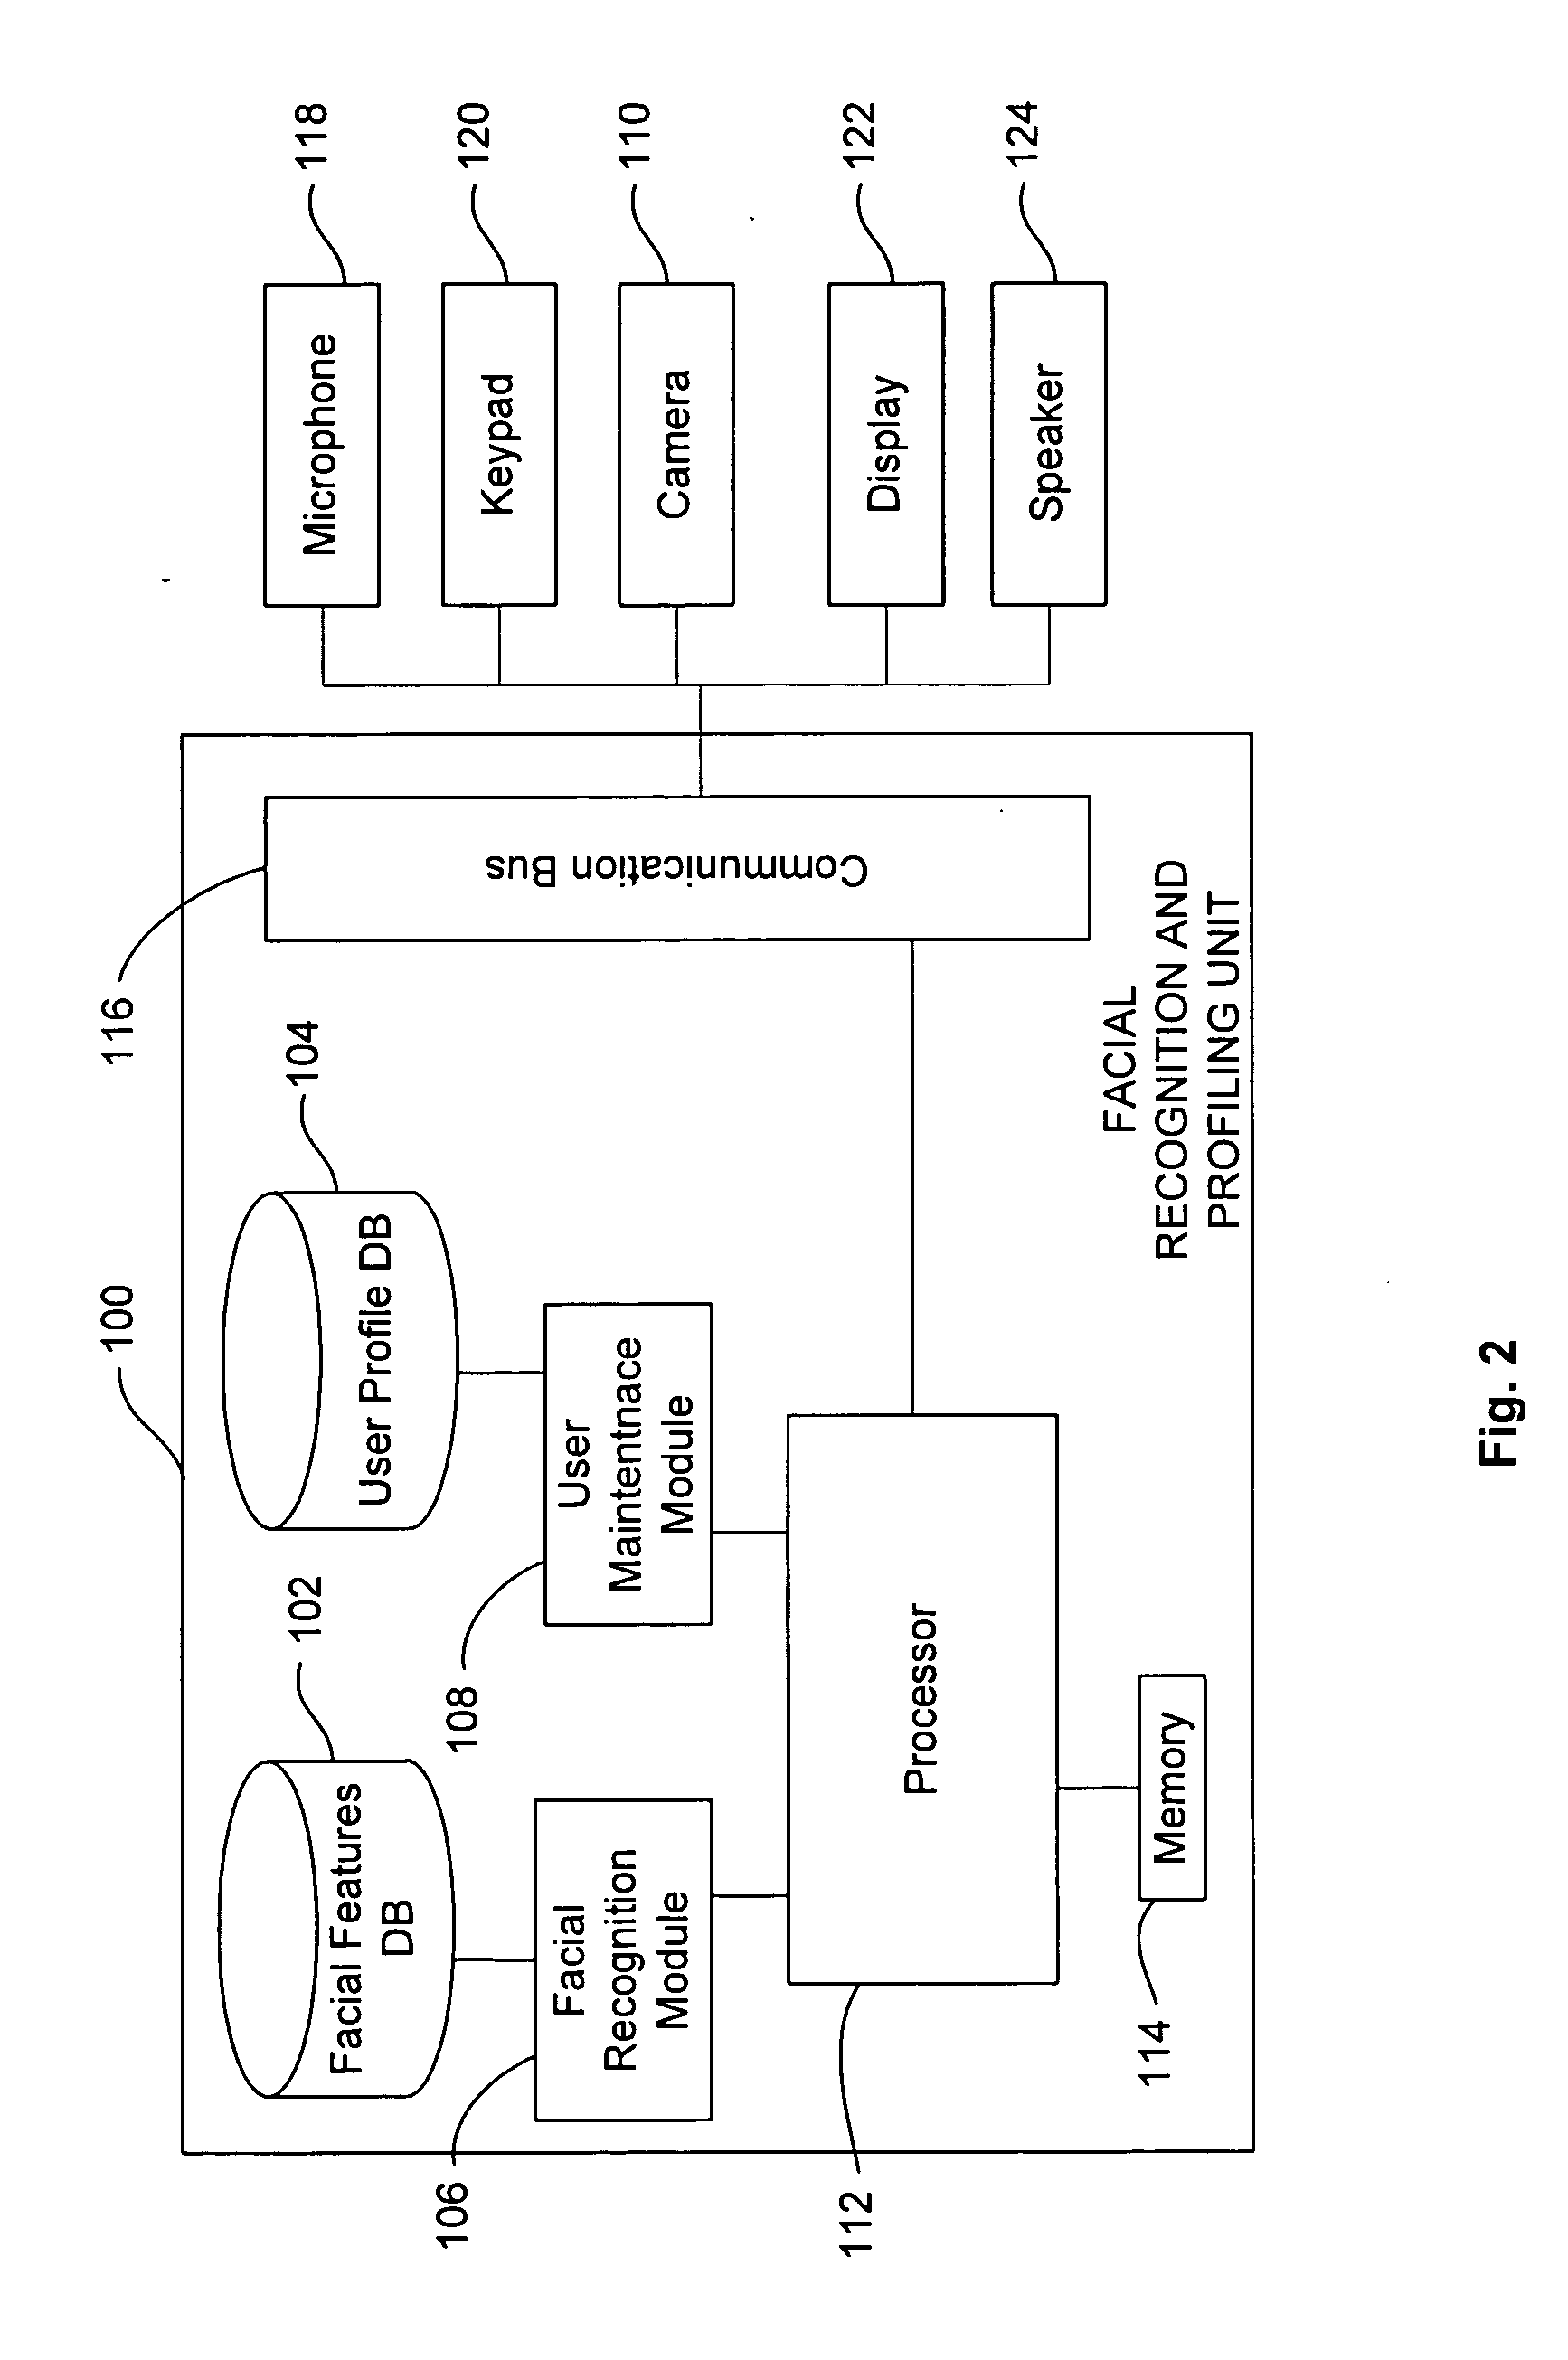 Method and apparatus for providing user profiling based on facial recognition